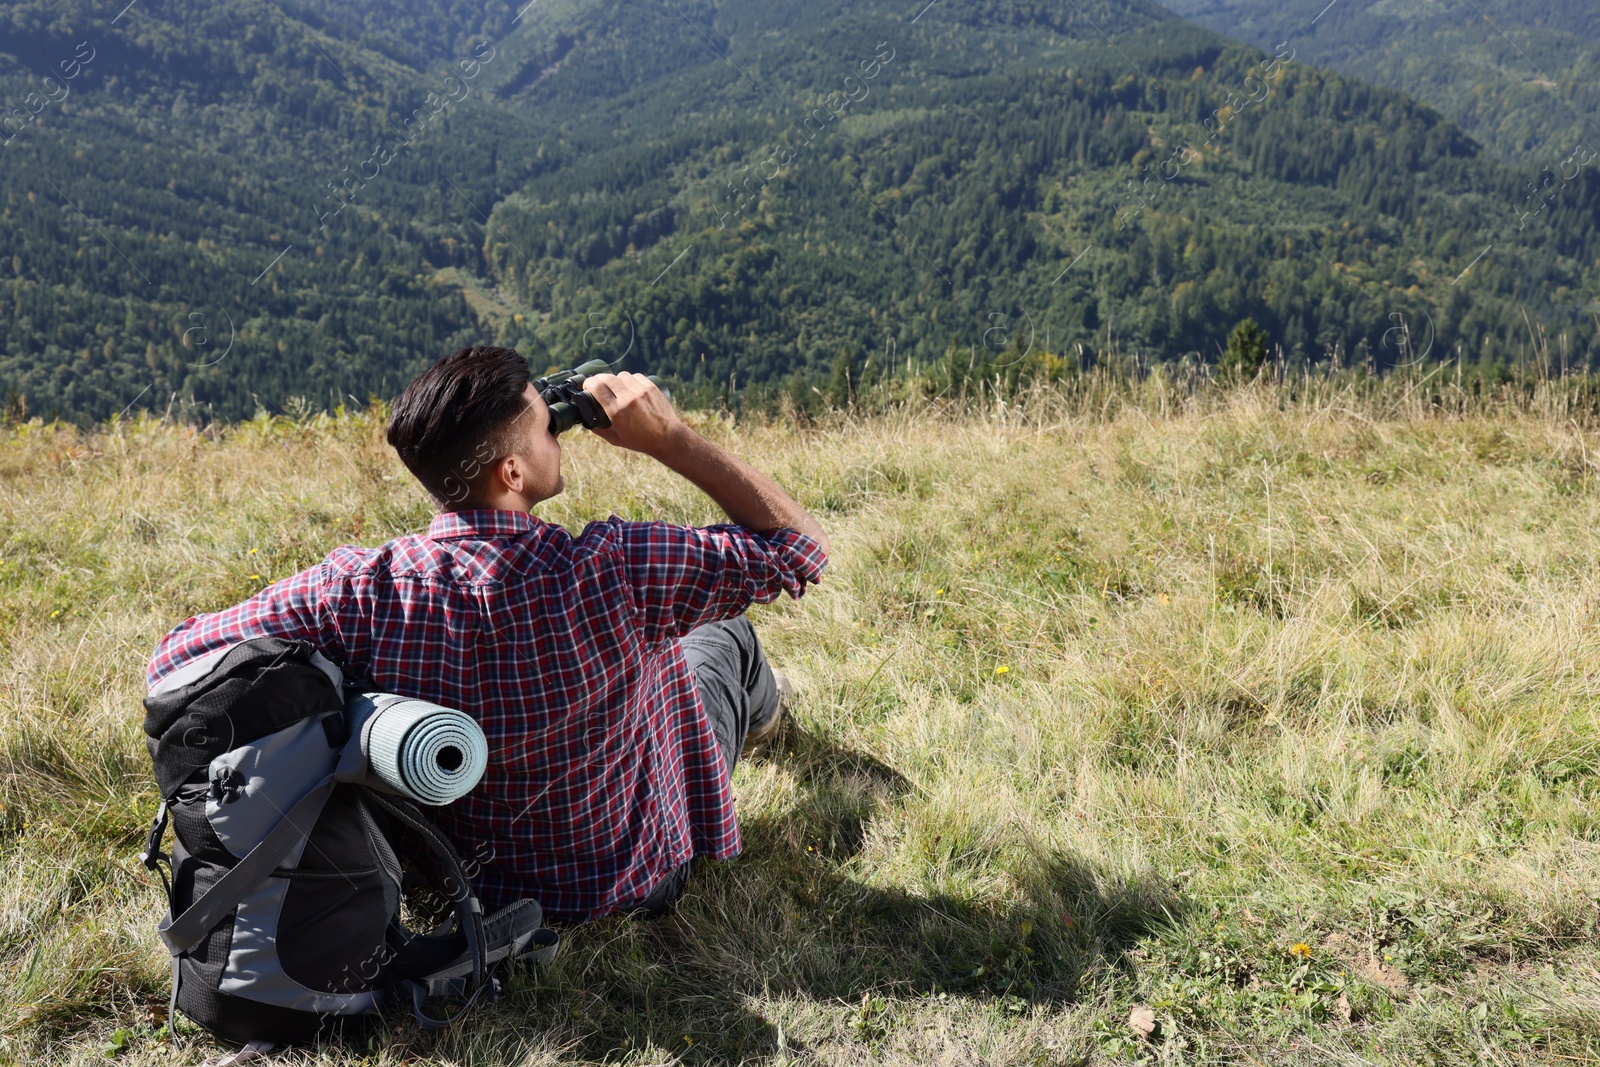 Photo of Tourist with hiking equipment looking through binoculars in mountains, back view